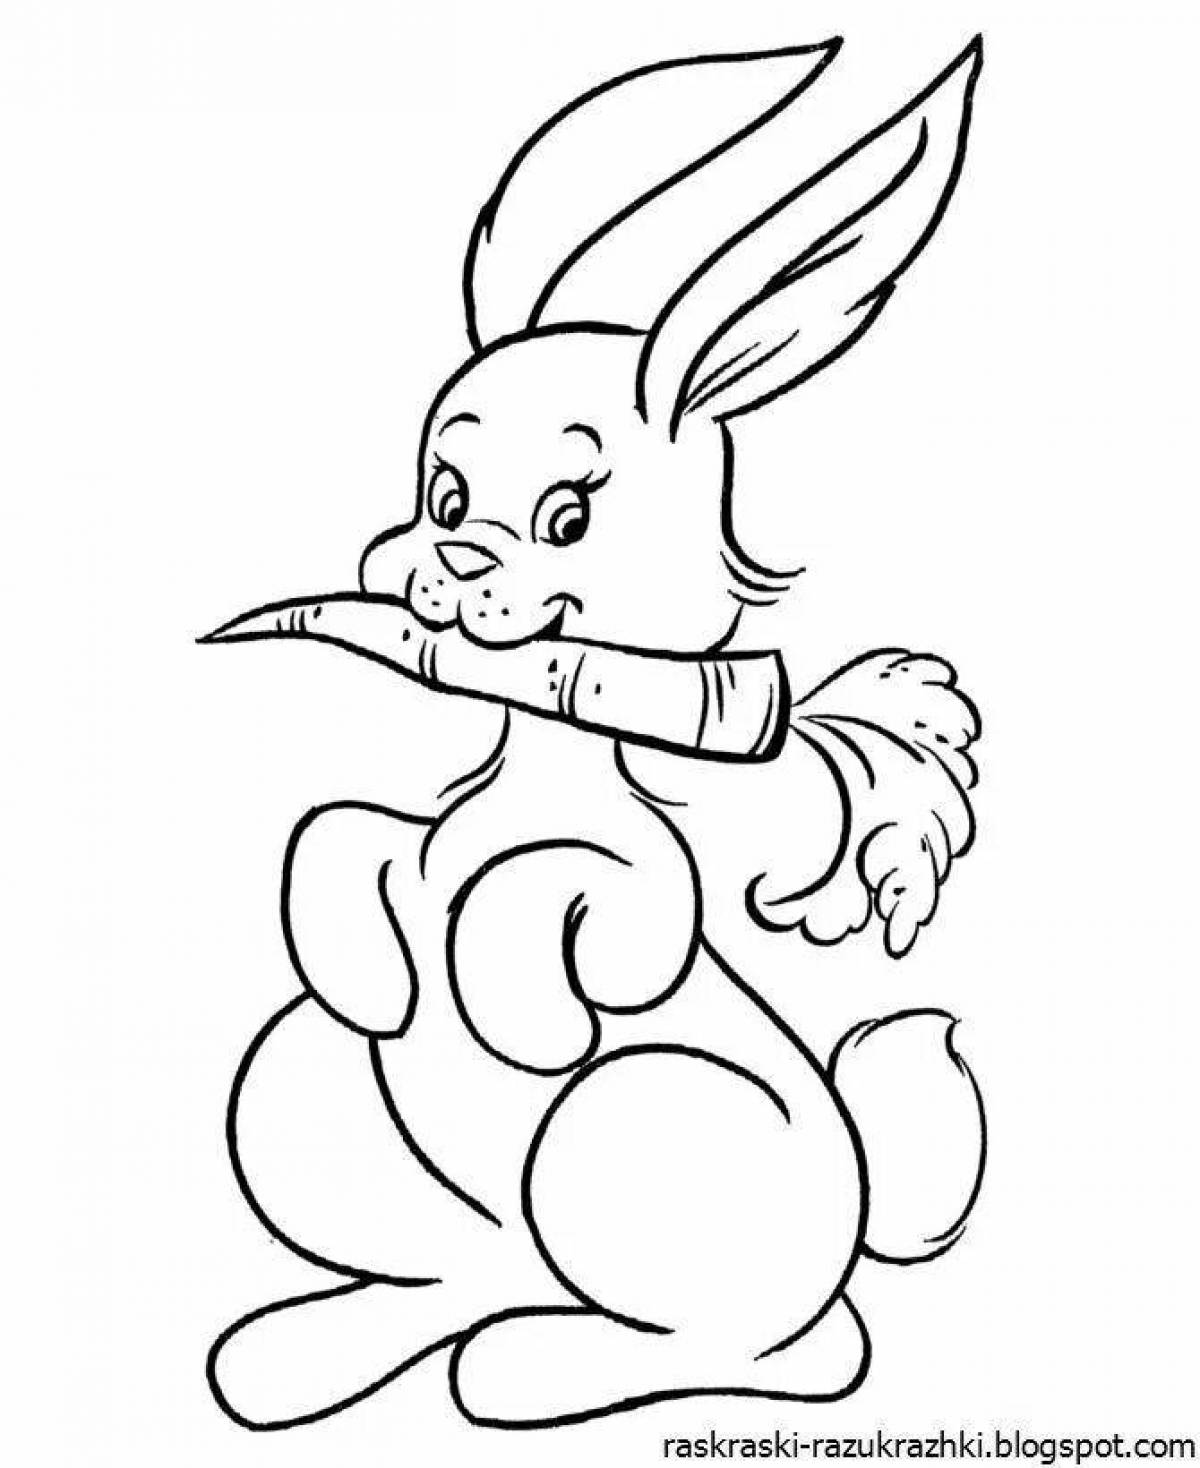 Coloring page joyful year of the hare